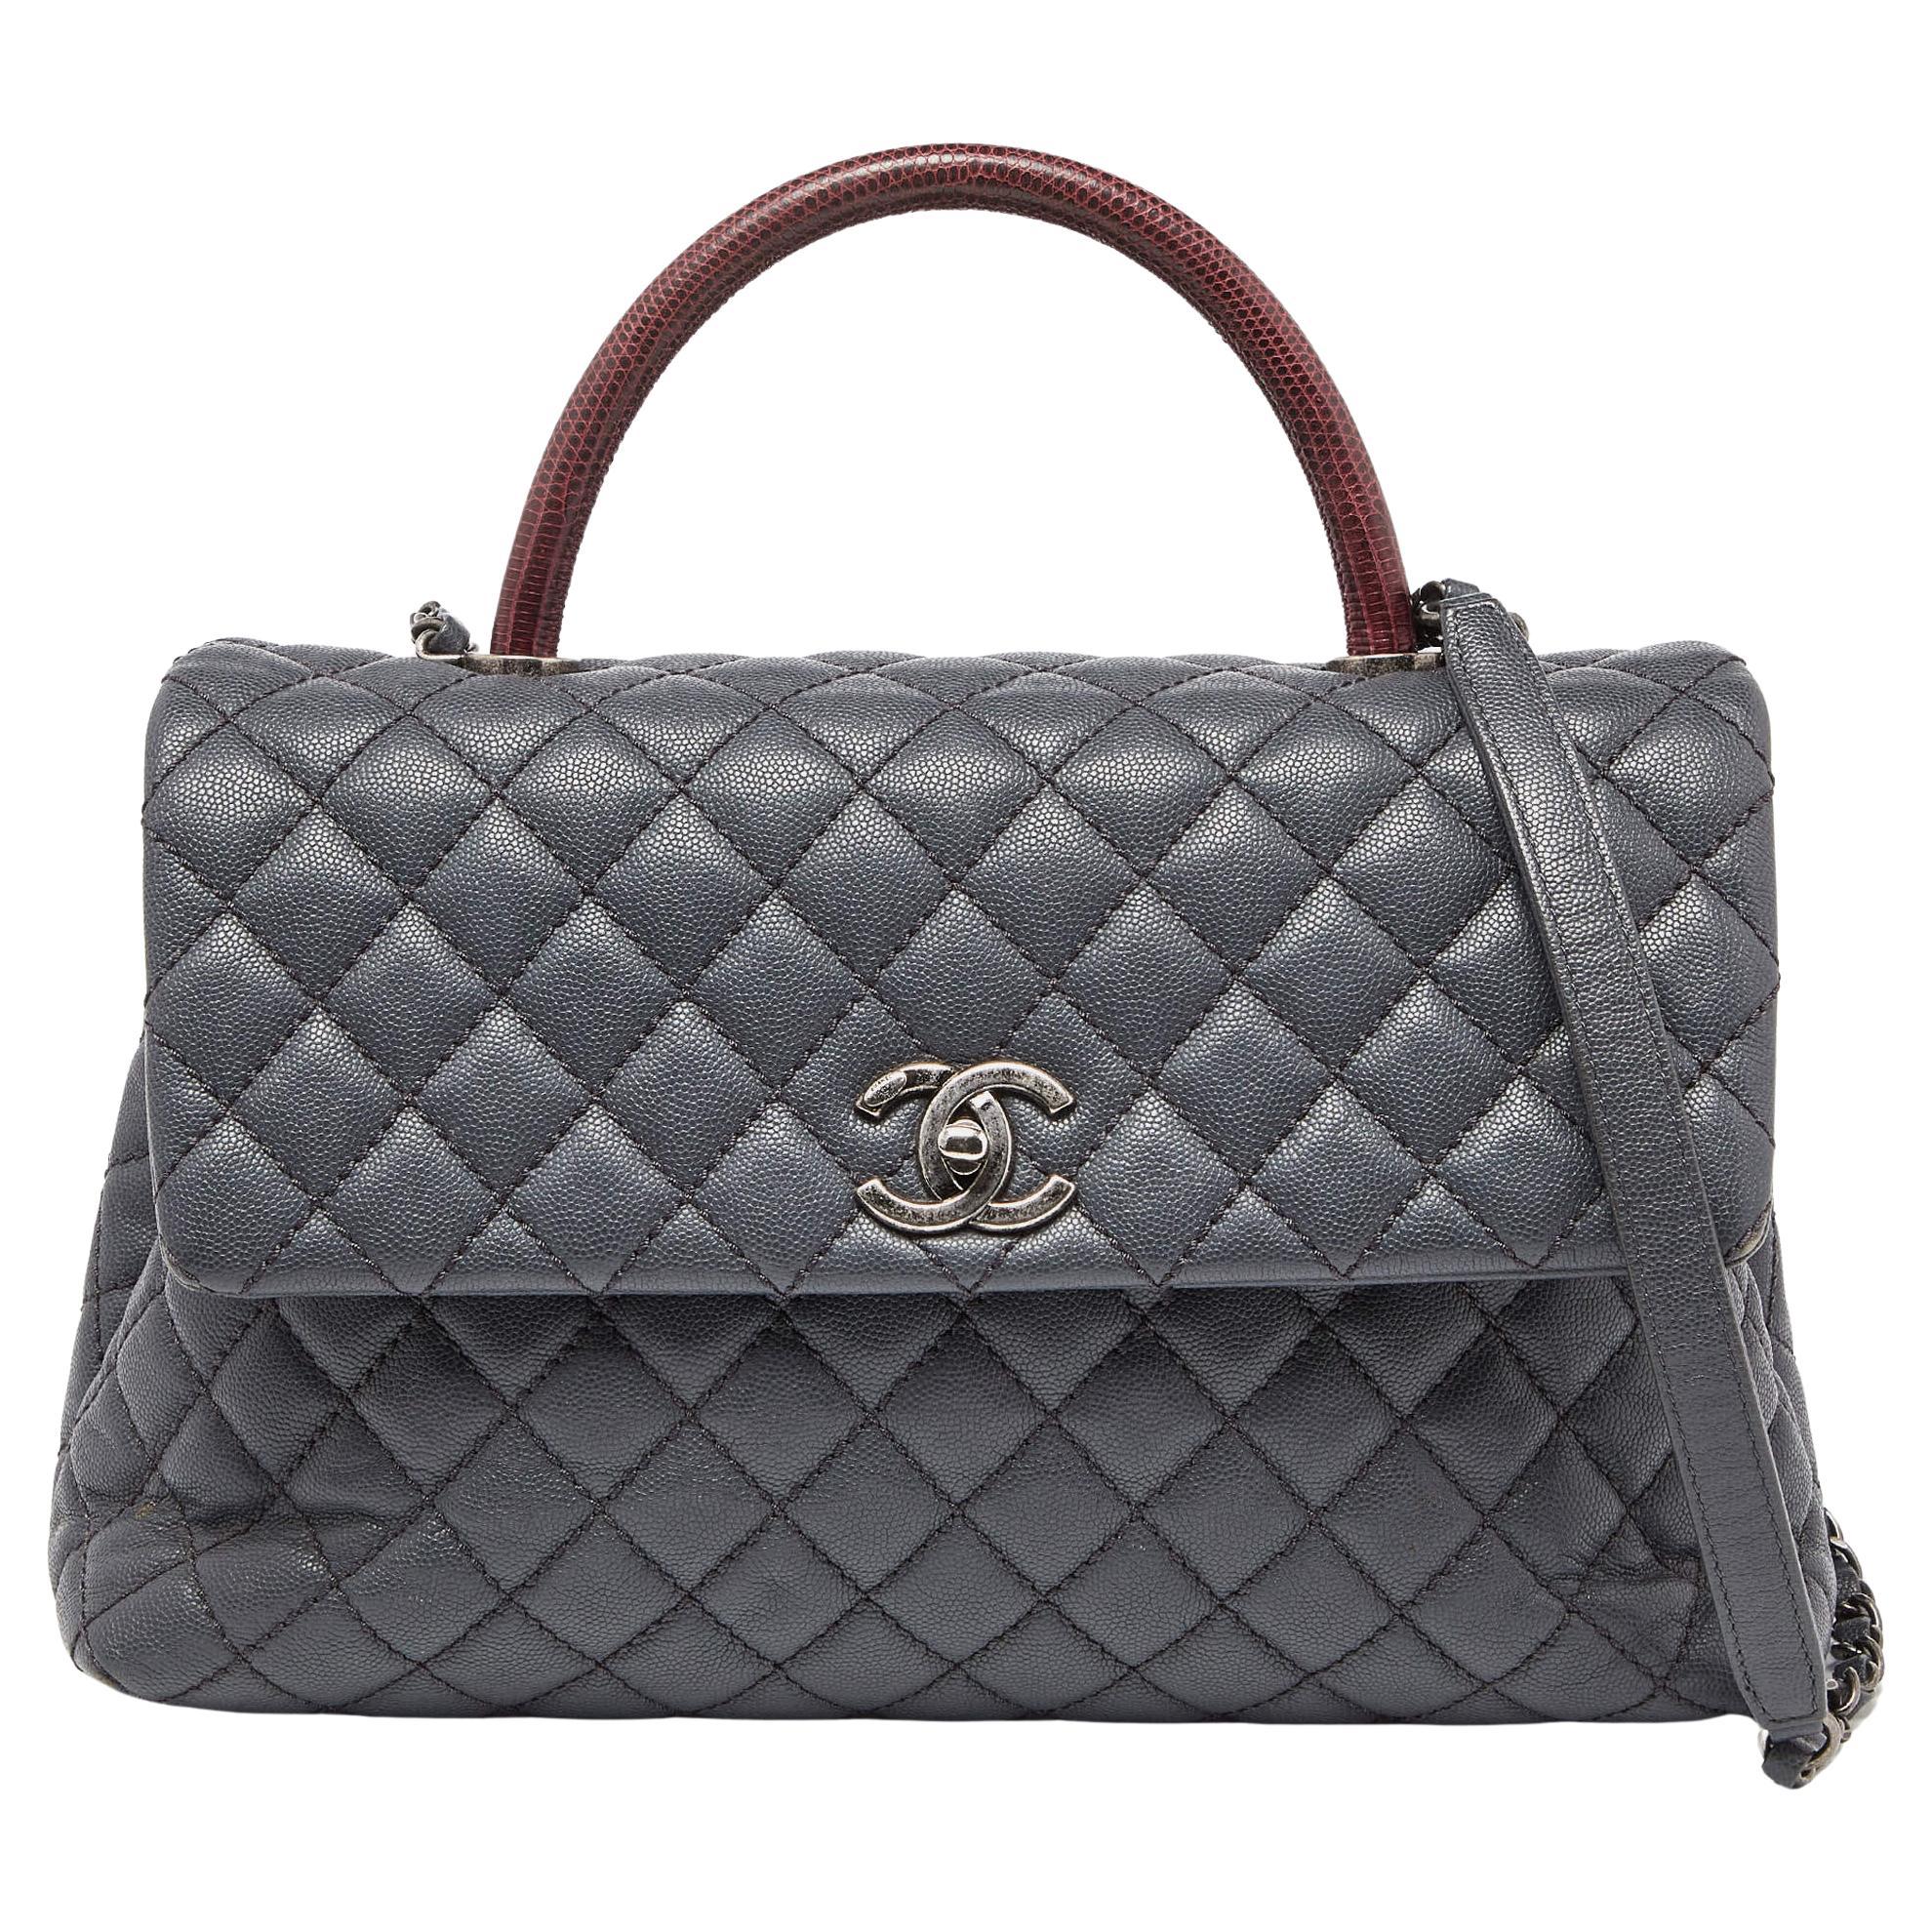 Chanel Grey/Red Caviar Leather and Lizard Leather Medium Coco Top Handle Bag